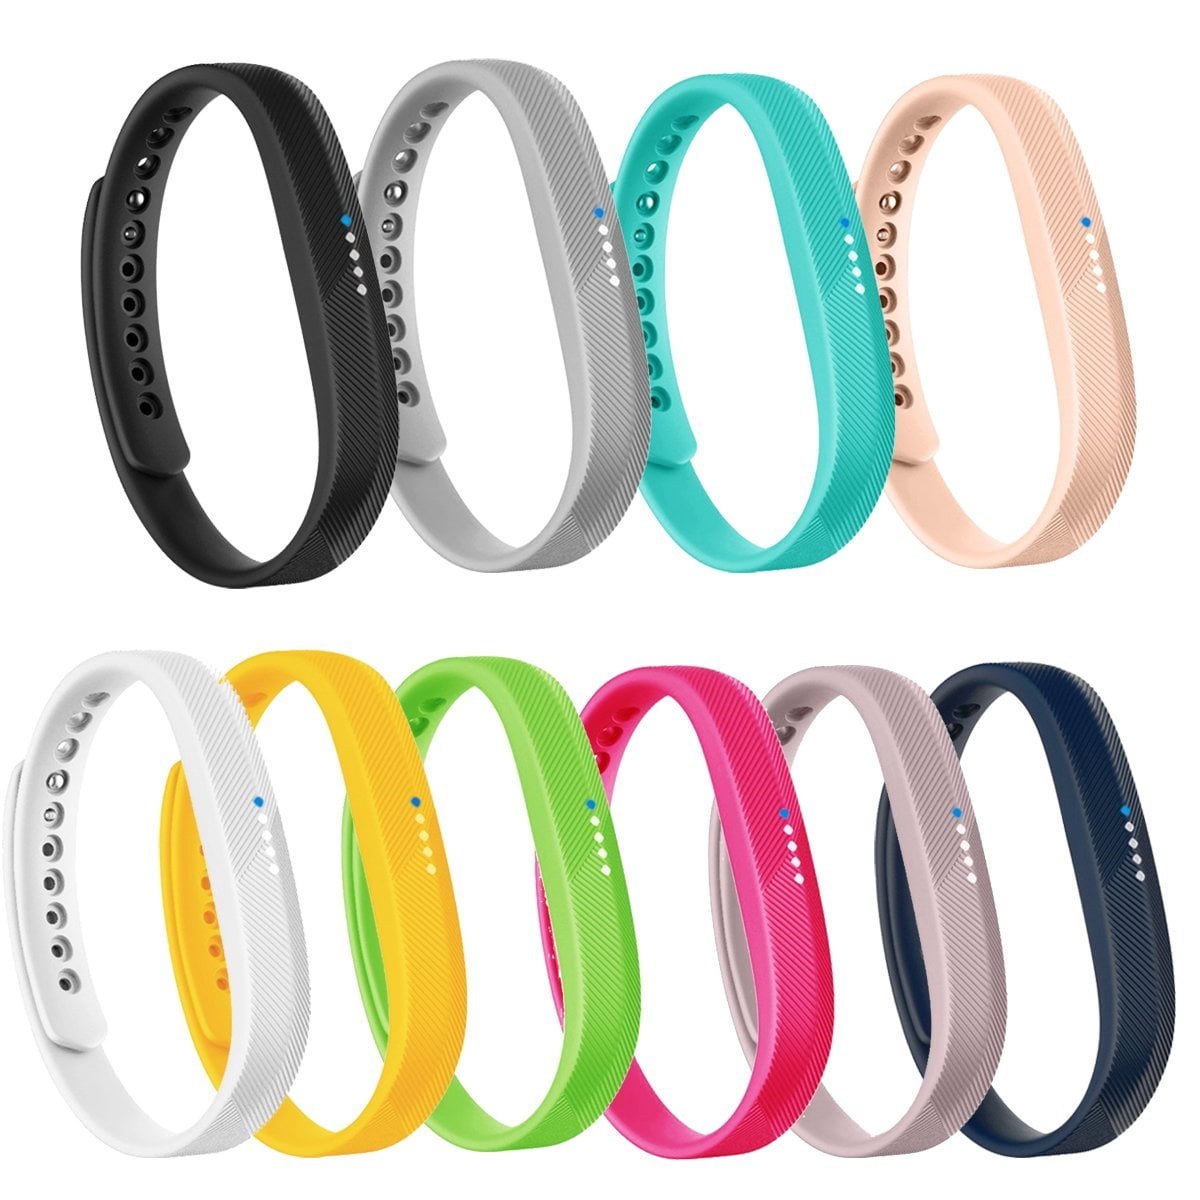 10pcs Replacement Wrist Band Wristband for Fitbit Flex with Clasps NoTracker TR 